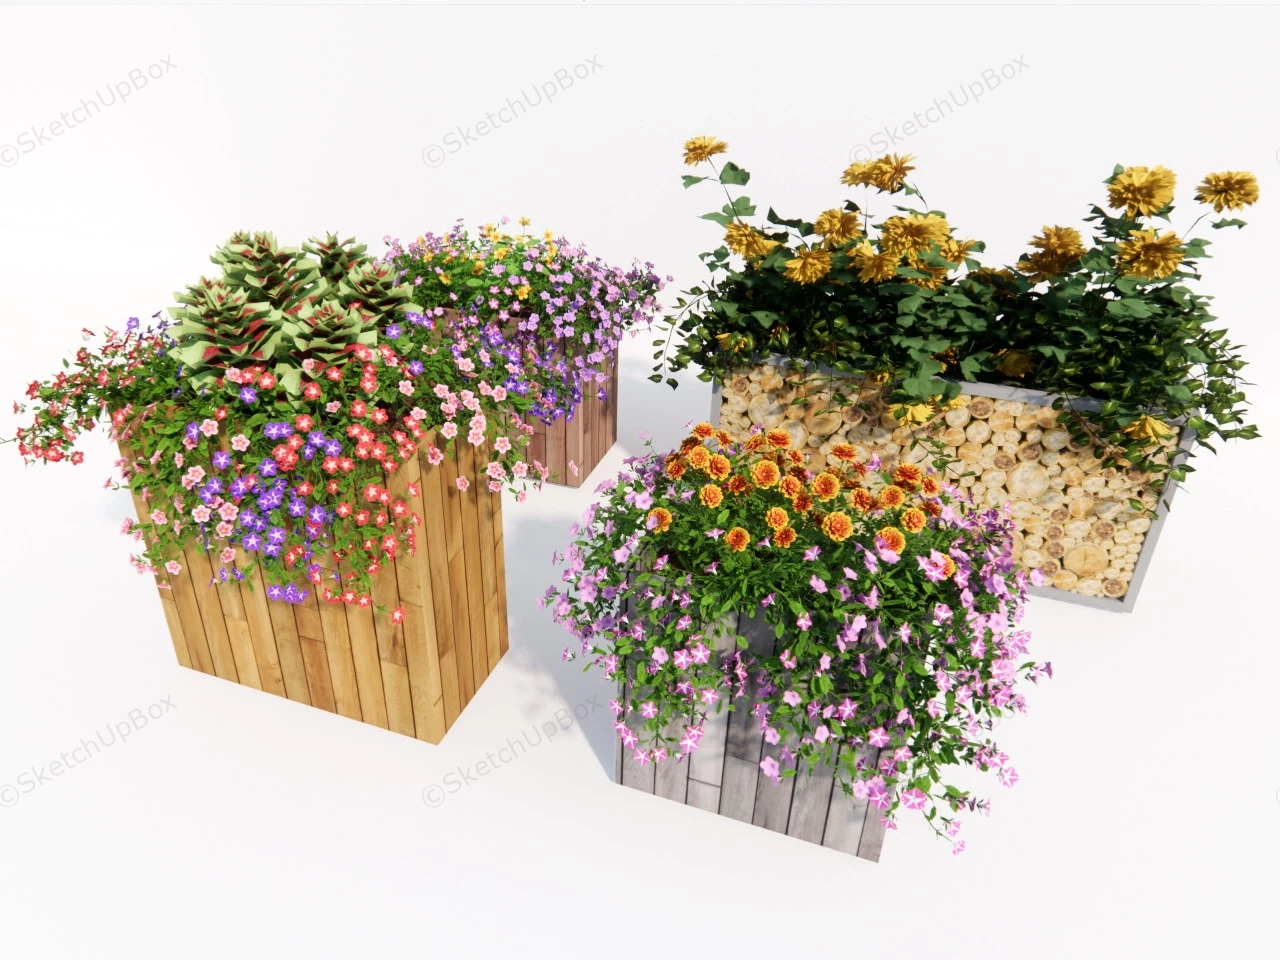 Wooden Flower Planter sketchup model preview - SketchupBox